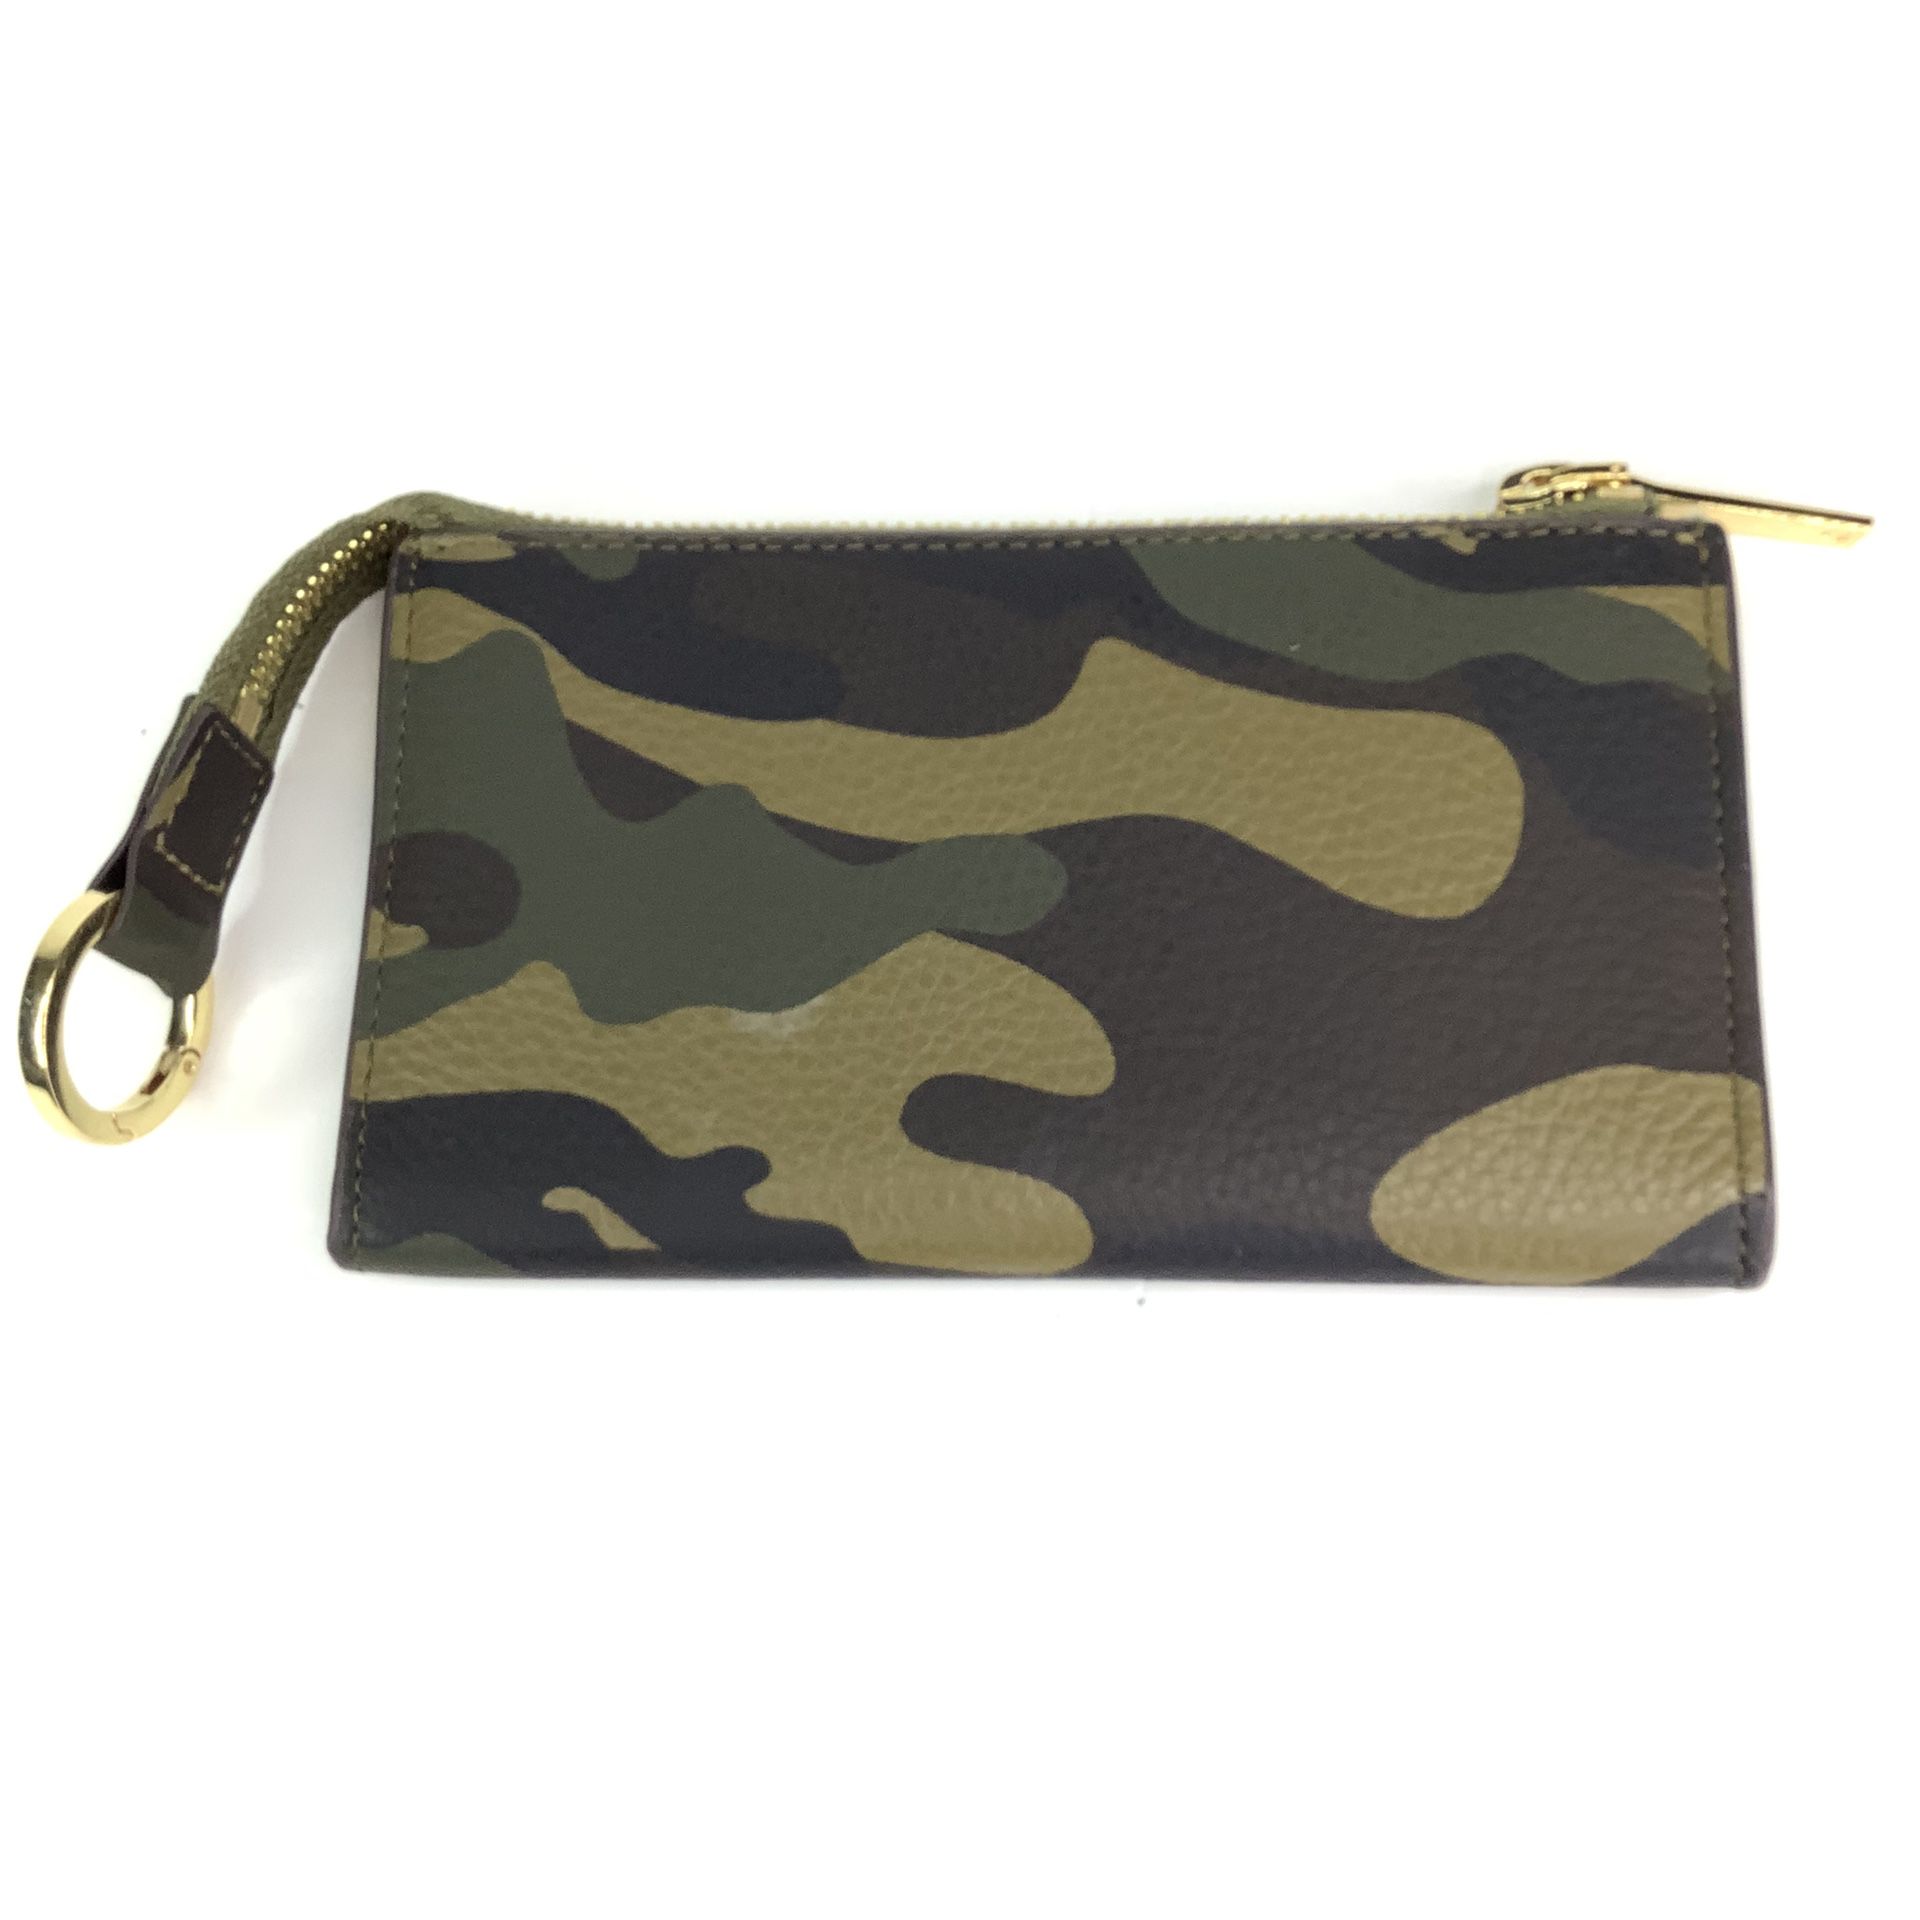 GILL Camouflage Leather Wristlet Wallet 